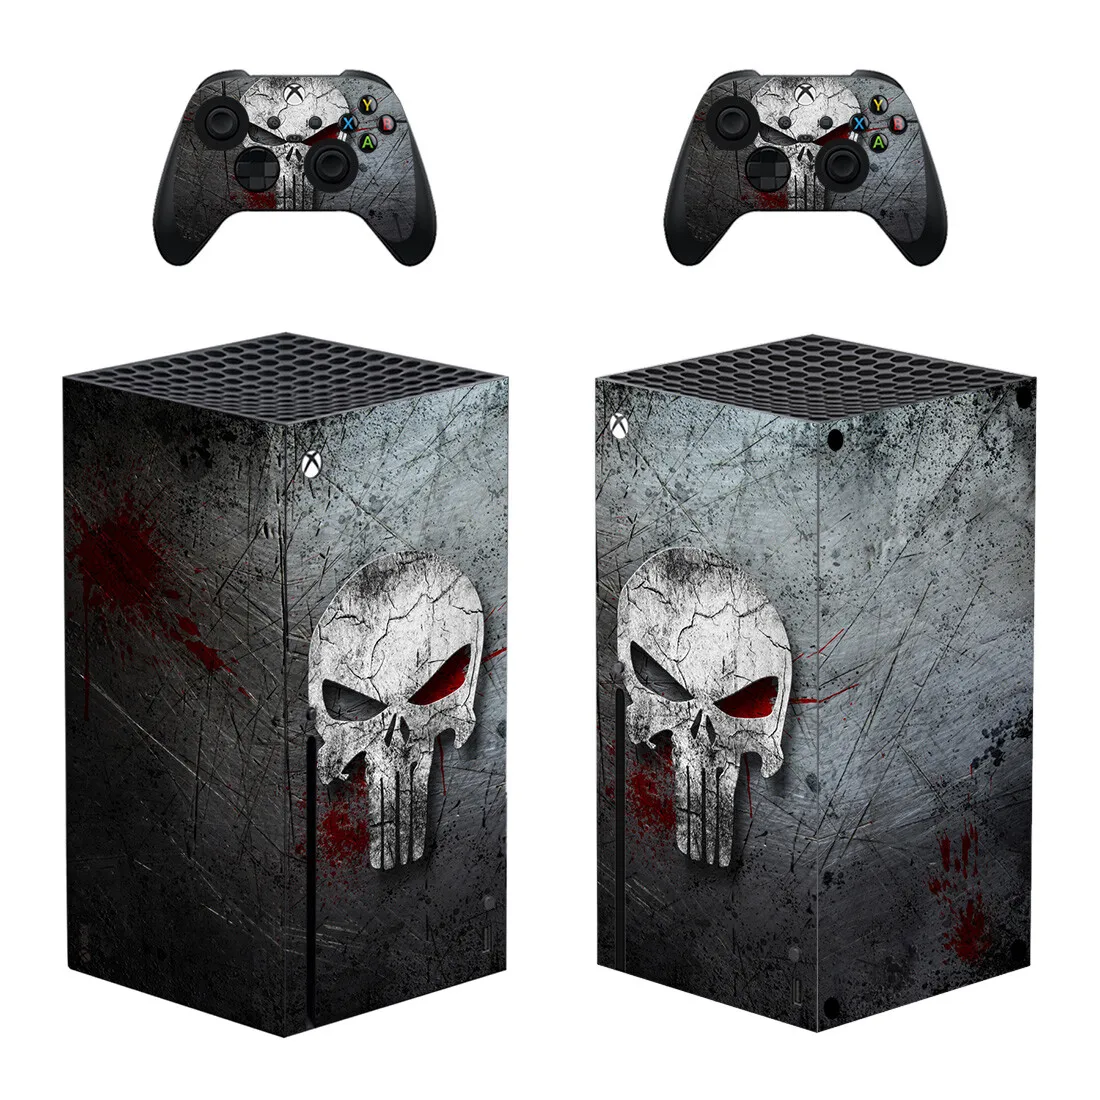 Skull Skin Sticker Decal Cover for Xbox Series X Console and 2 Controllers Xbox Series X Skin Sticker Vinyl